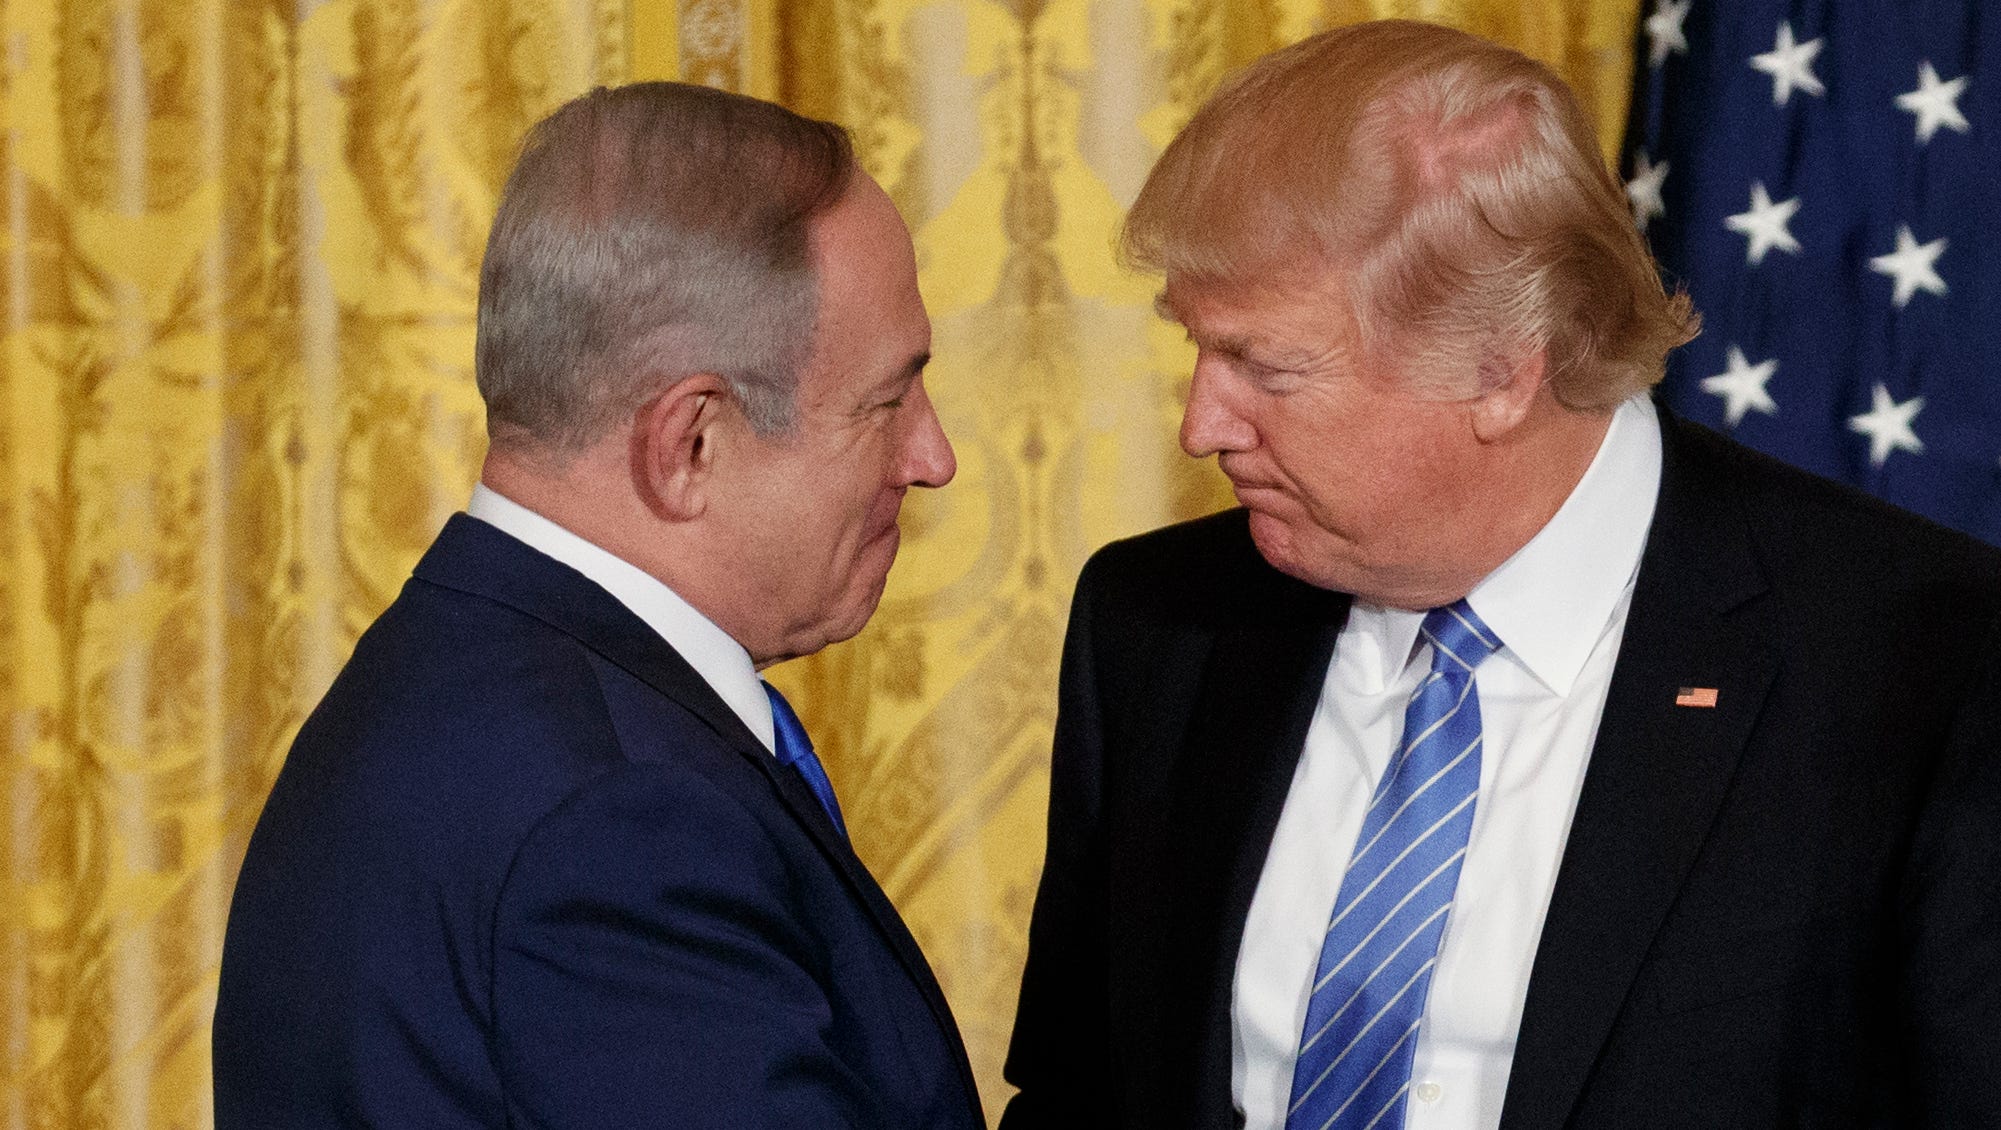 Trump and Netanyahu waver on support for two-state solution in Middle East